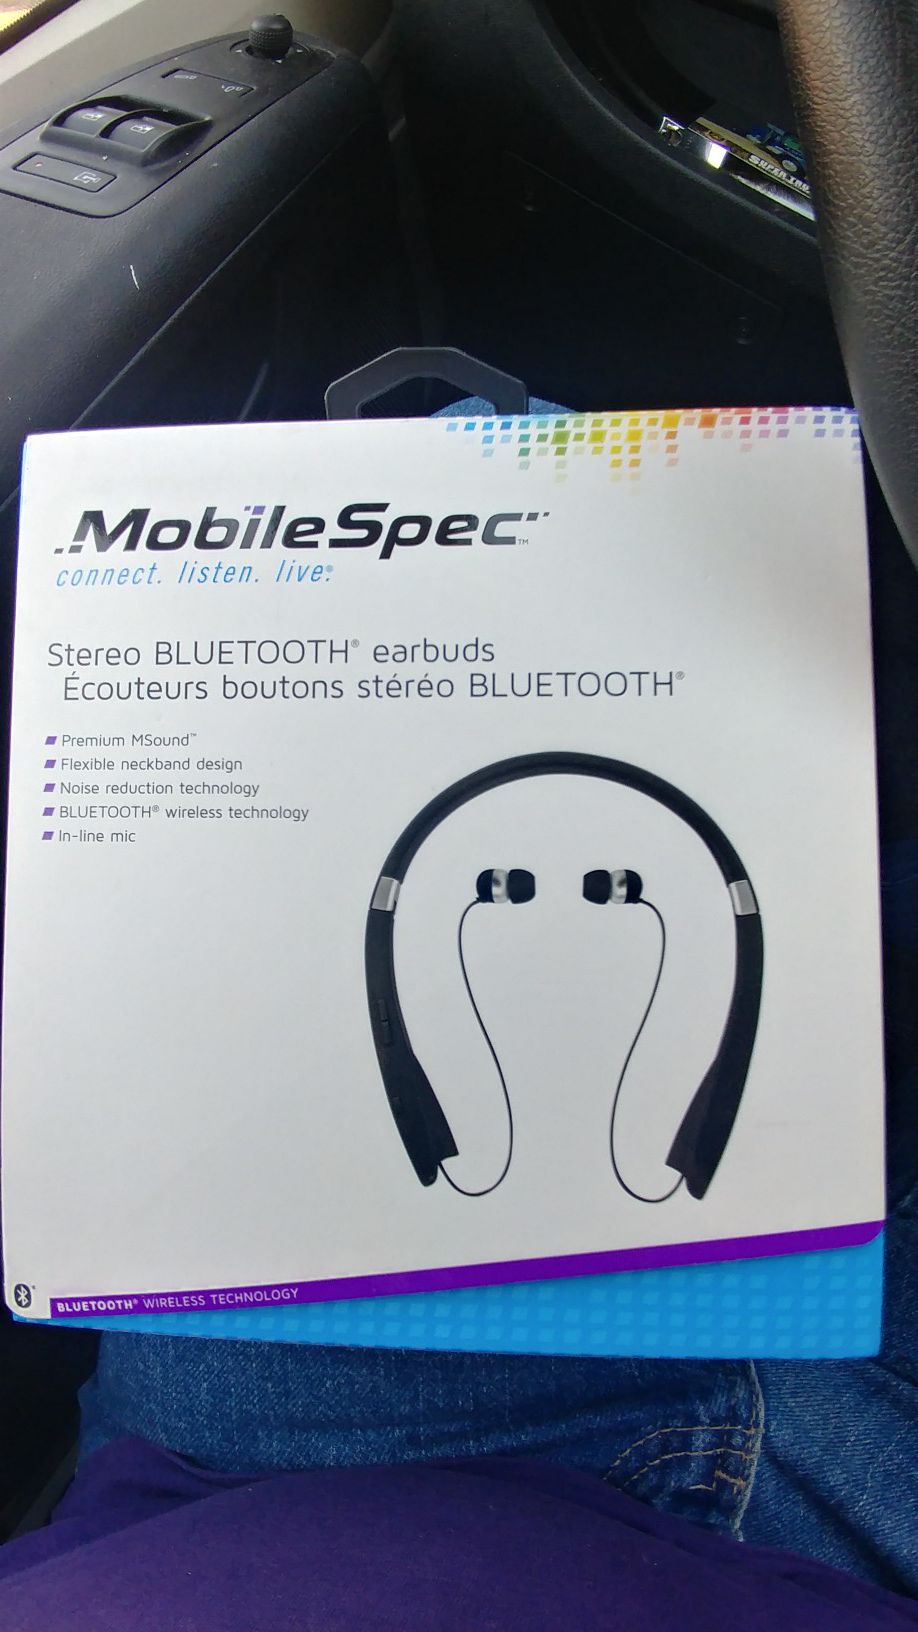 Mobile Spec stereo bluetooth earbuds...